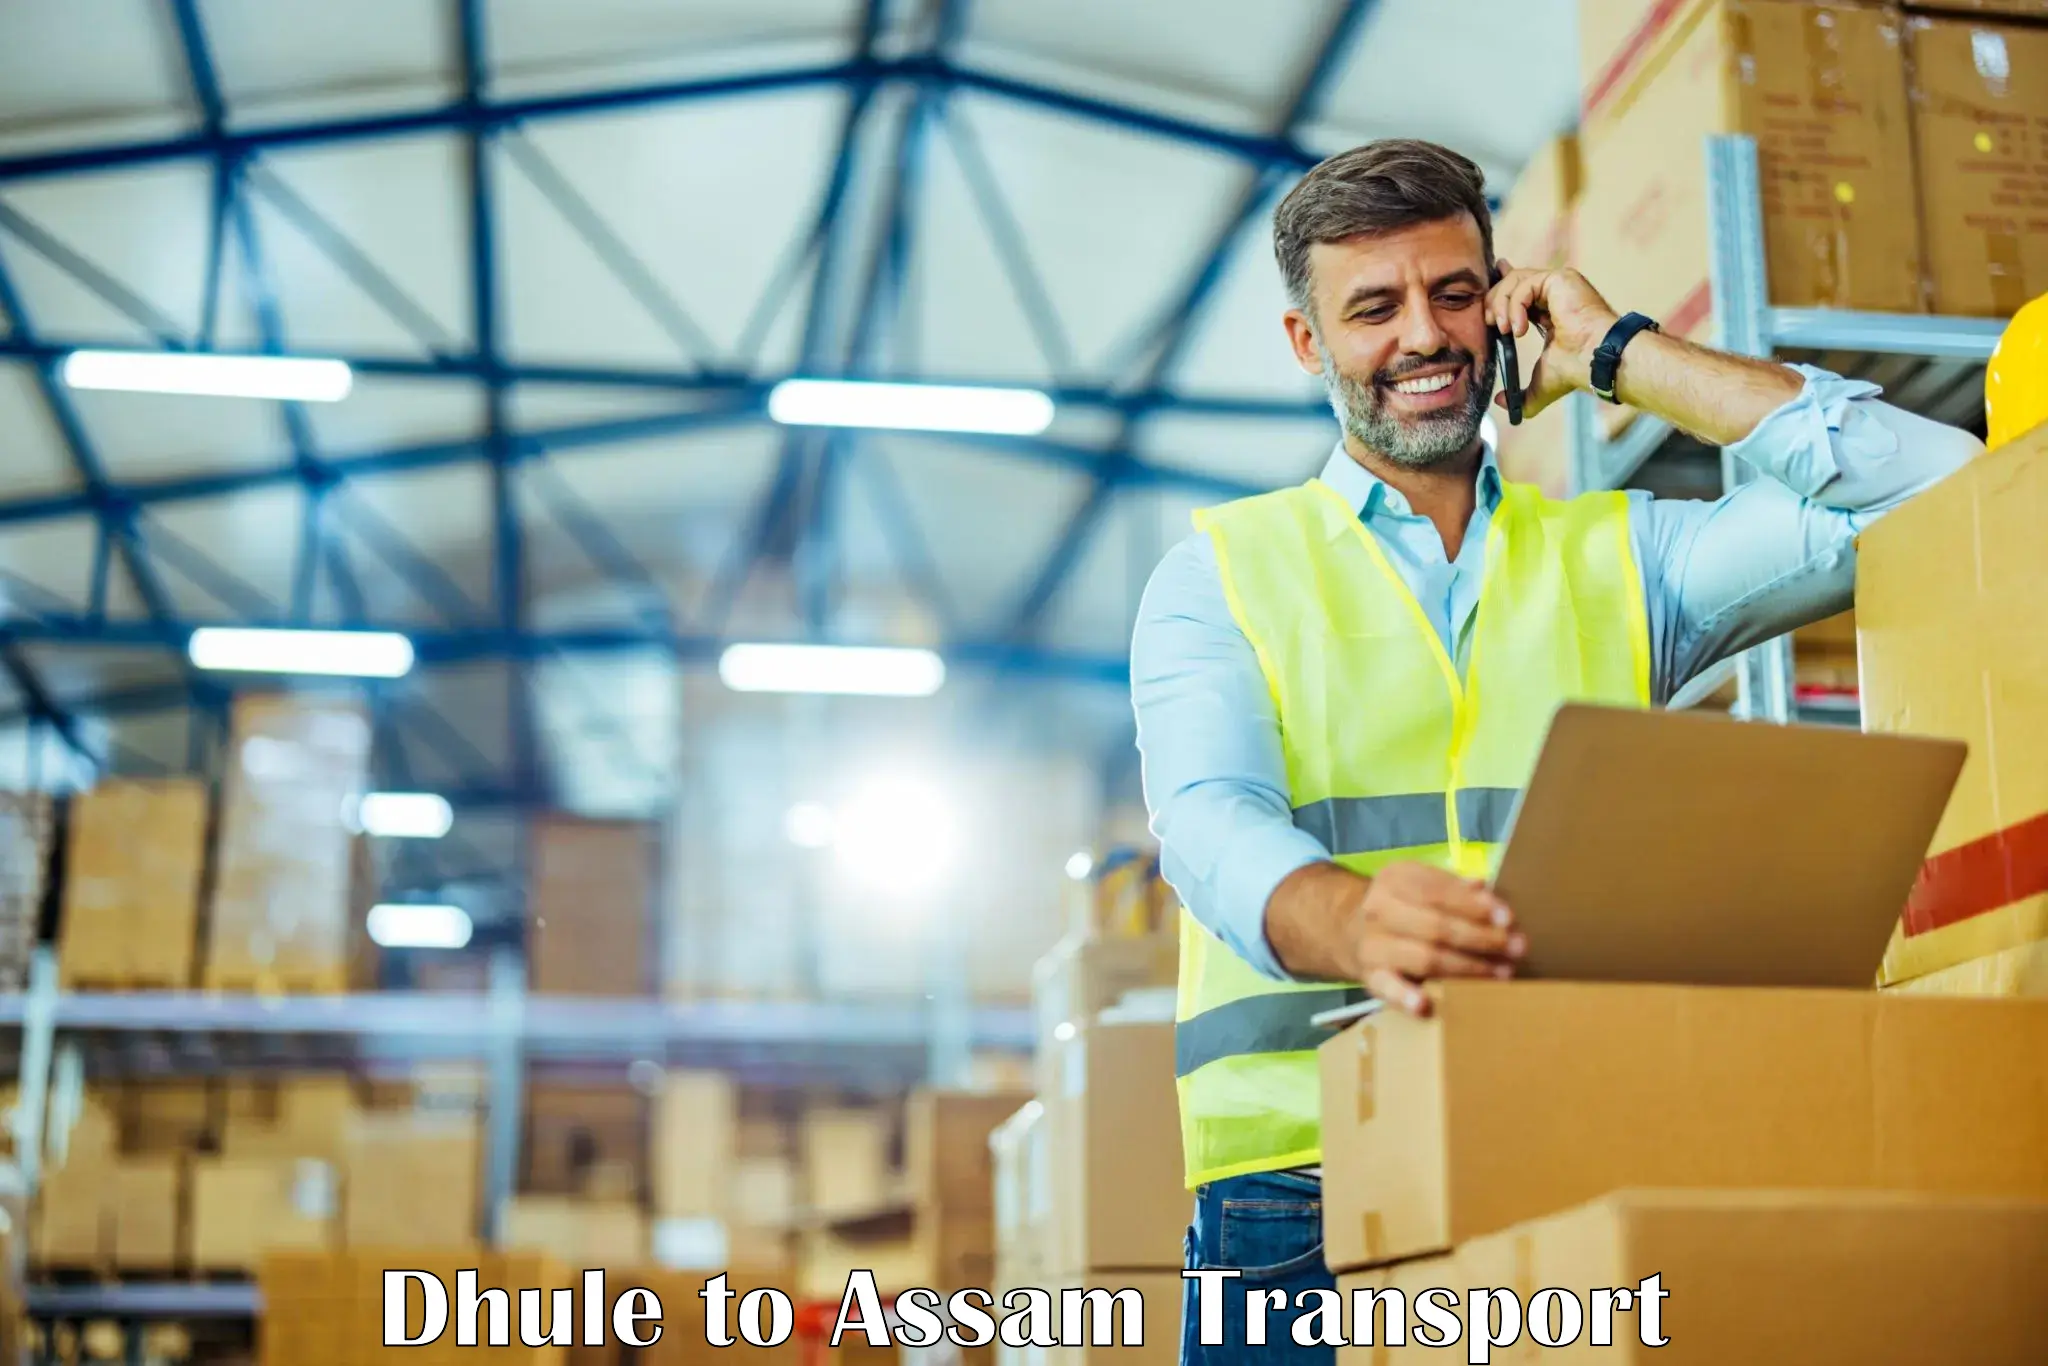 Express transport services Dhule to Guwahati